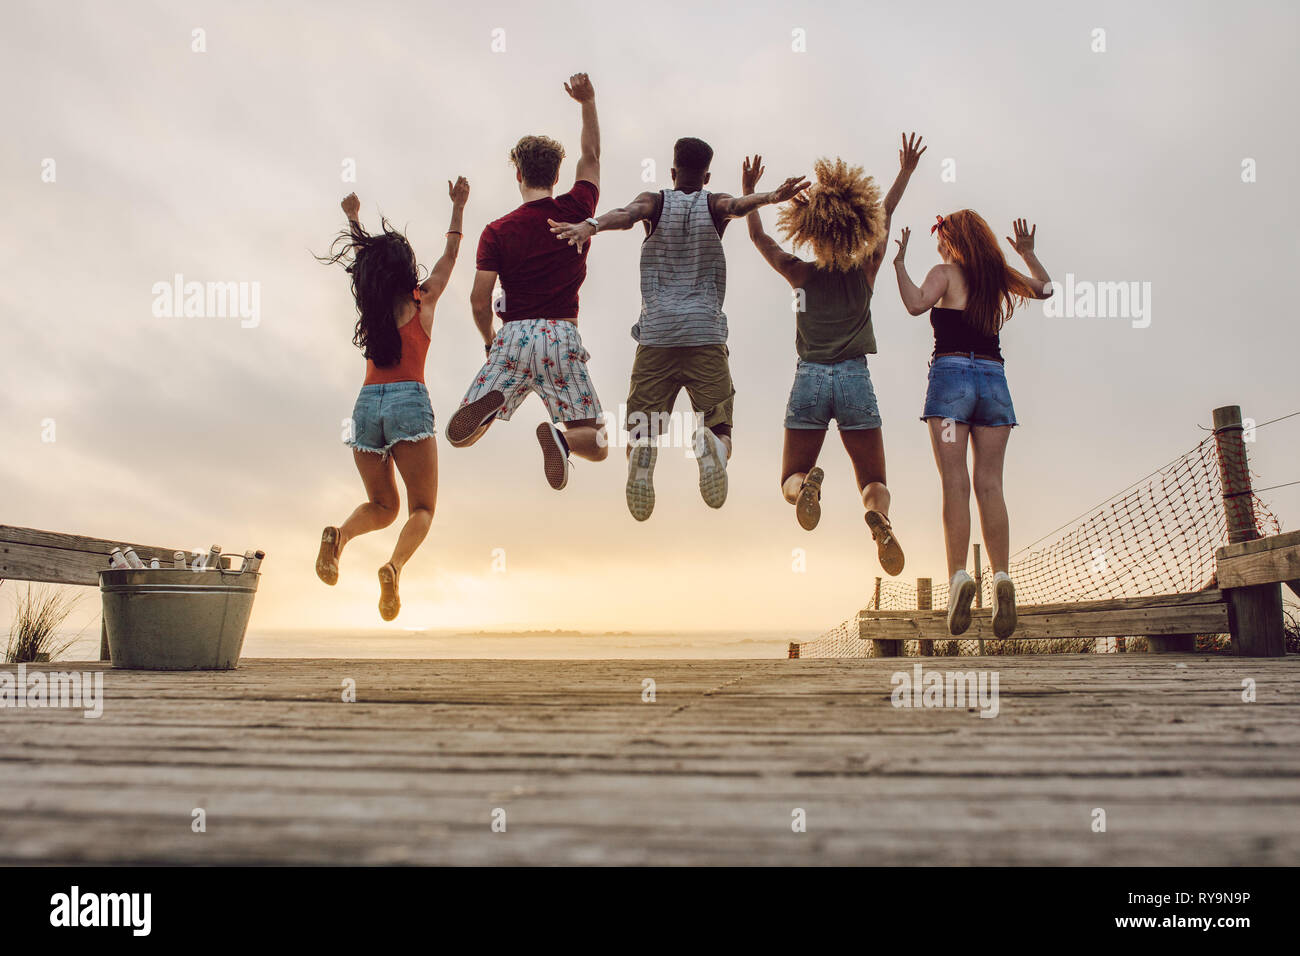 Rear view of young people jumping at the beach during sunset. Group of friends enjoying at the beach. Stock Photo